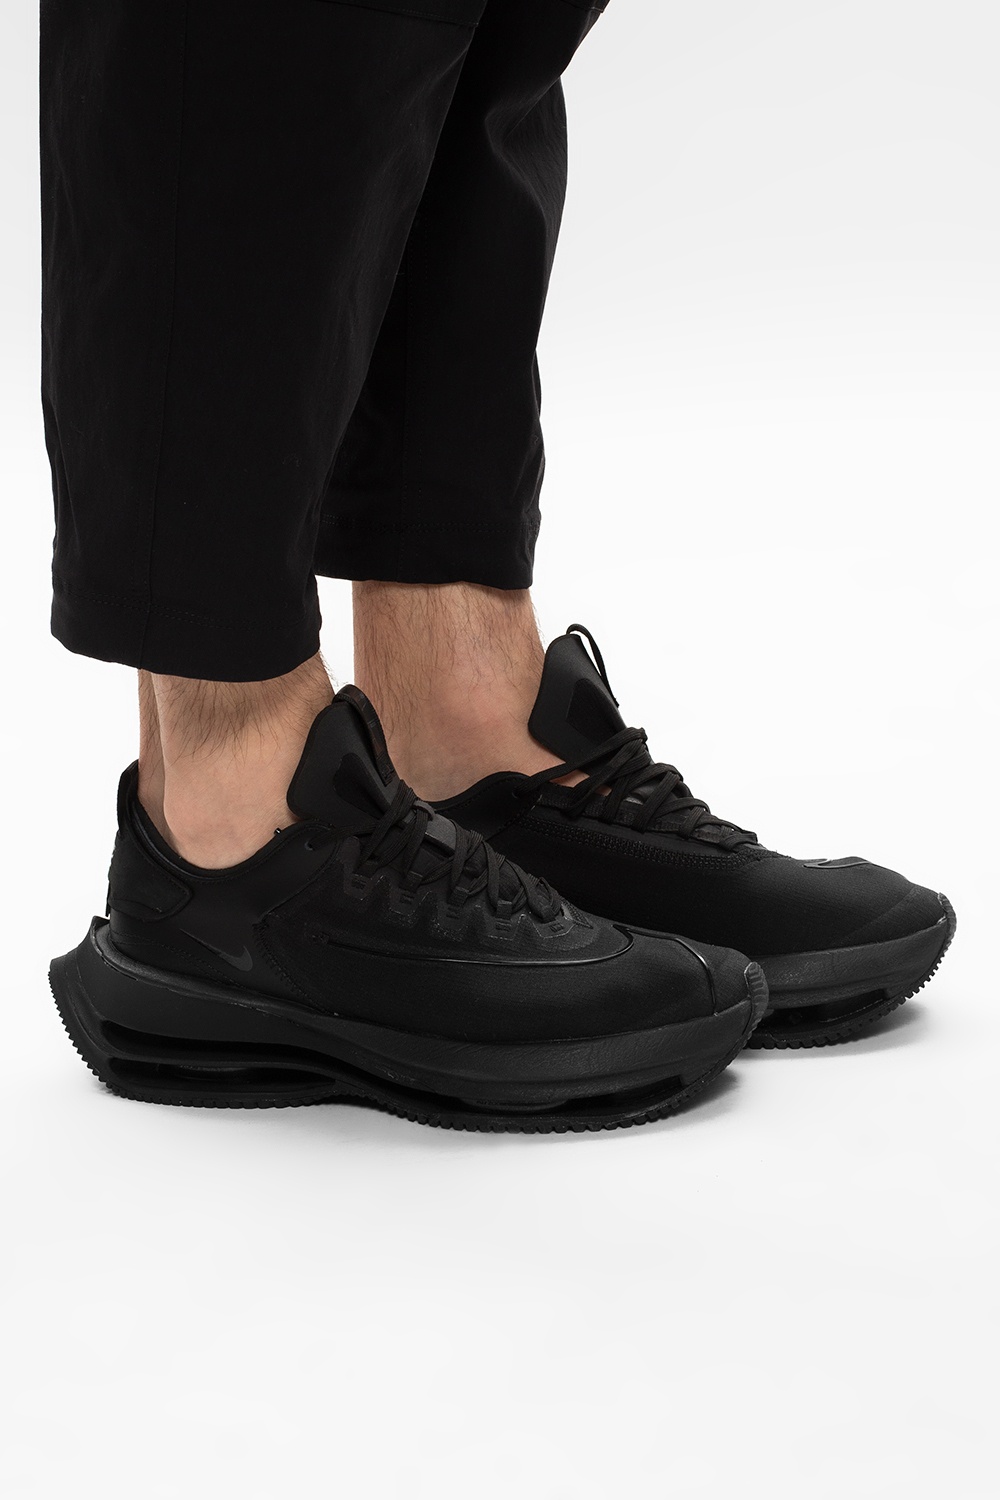 nike zoom double stacked black